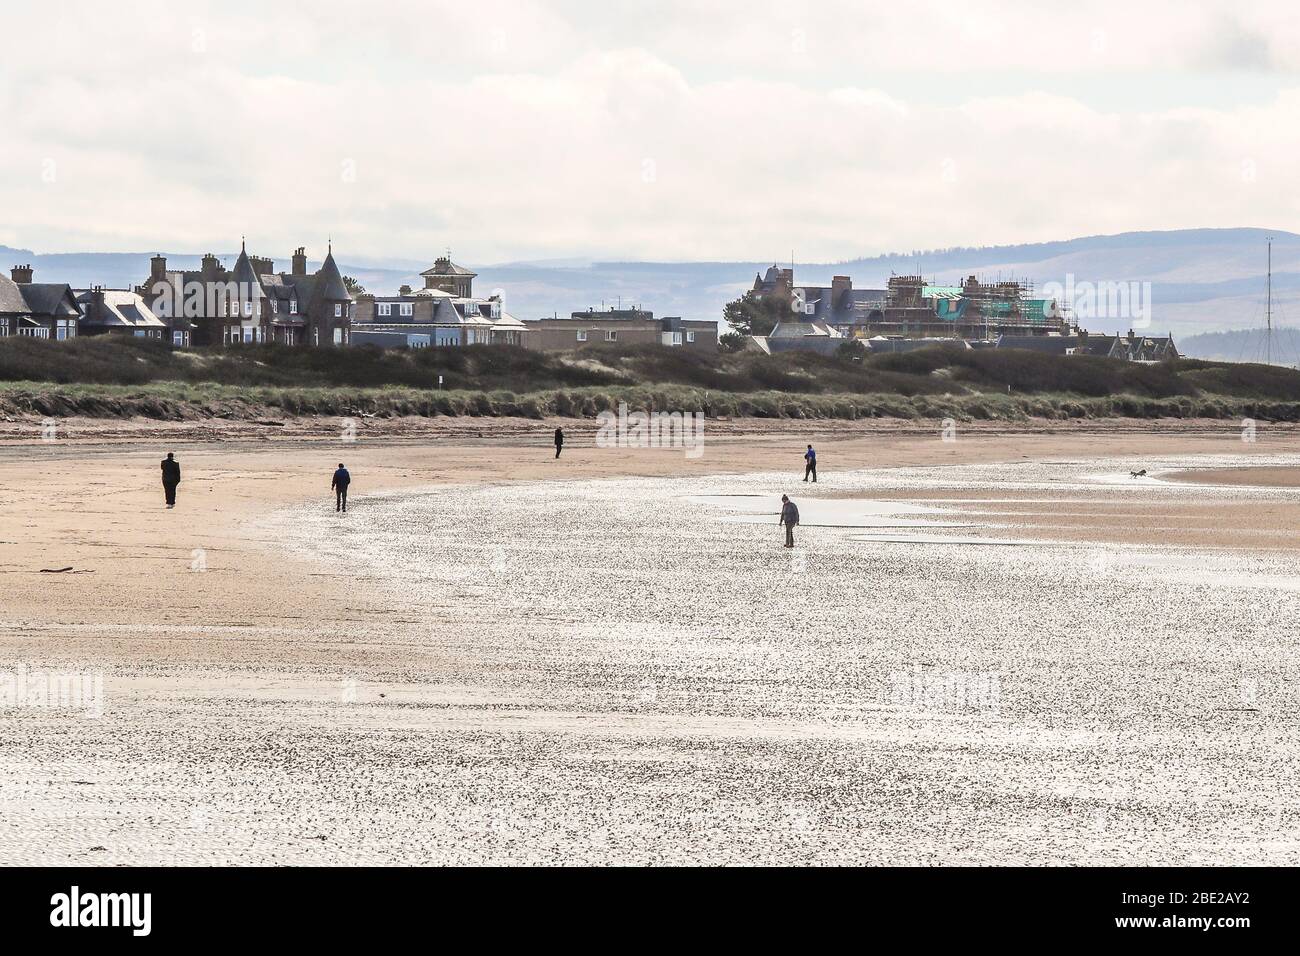 Troon, UK. 11 April 2020. On what would normally be one of the busiest weekends of the year, Easter weekend, it appears that people are taking the Government's advice and staying at home and not travelling to tourist destinations. Troon beach, on Easter weekend would normally be the preferred choice for thousands of tourists and day trippers  who might travel considerable distances to enjoy the resort. Credit: Findlay/ Alamy News Stock Photo